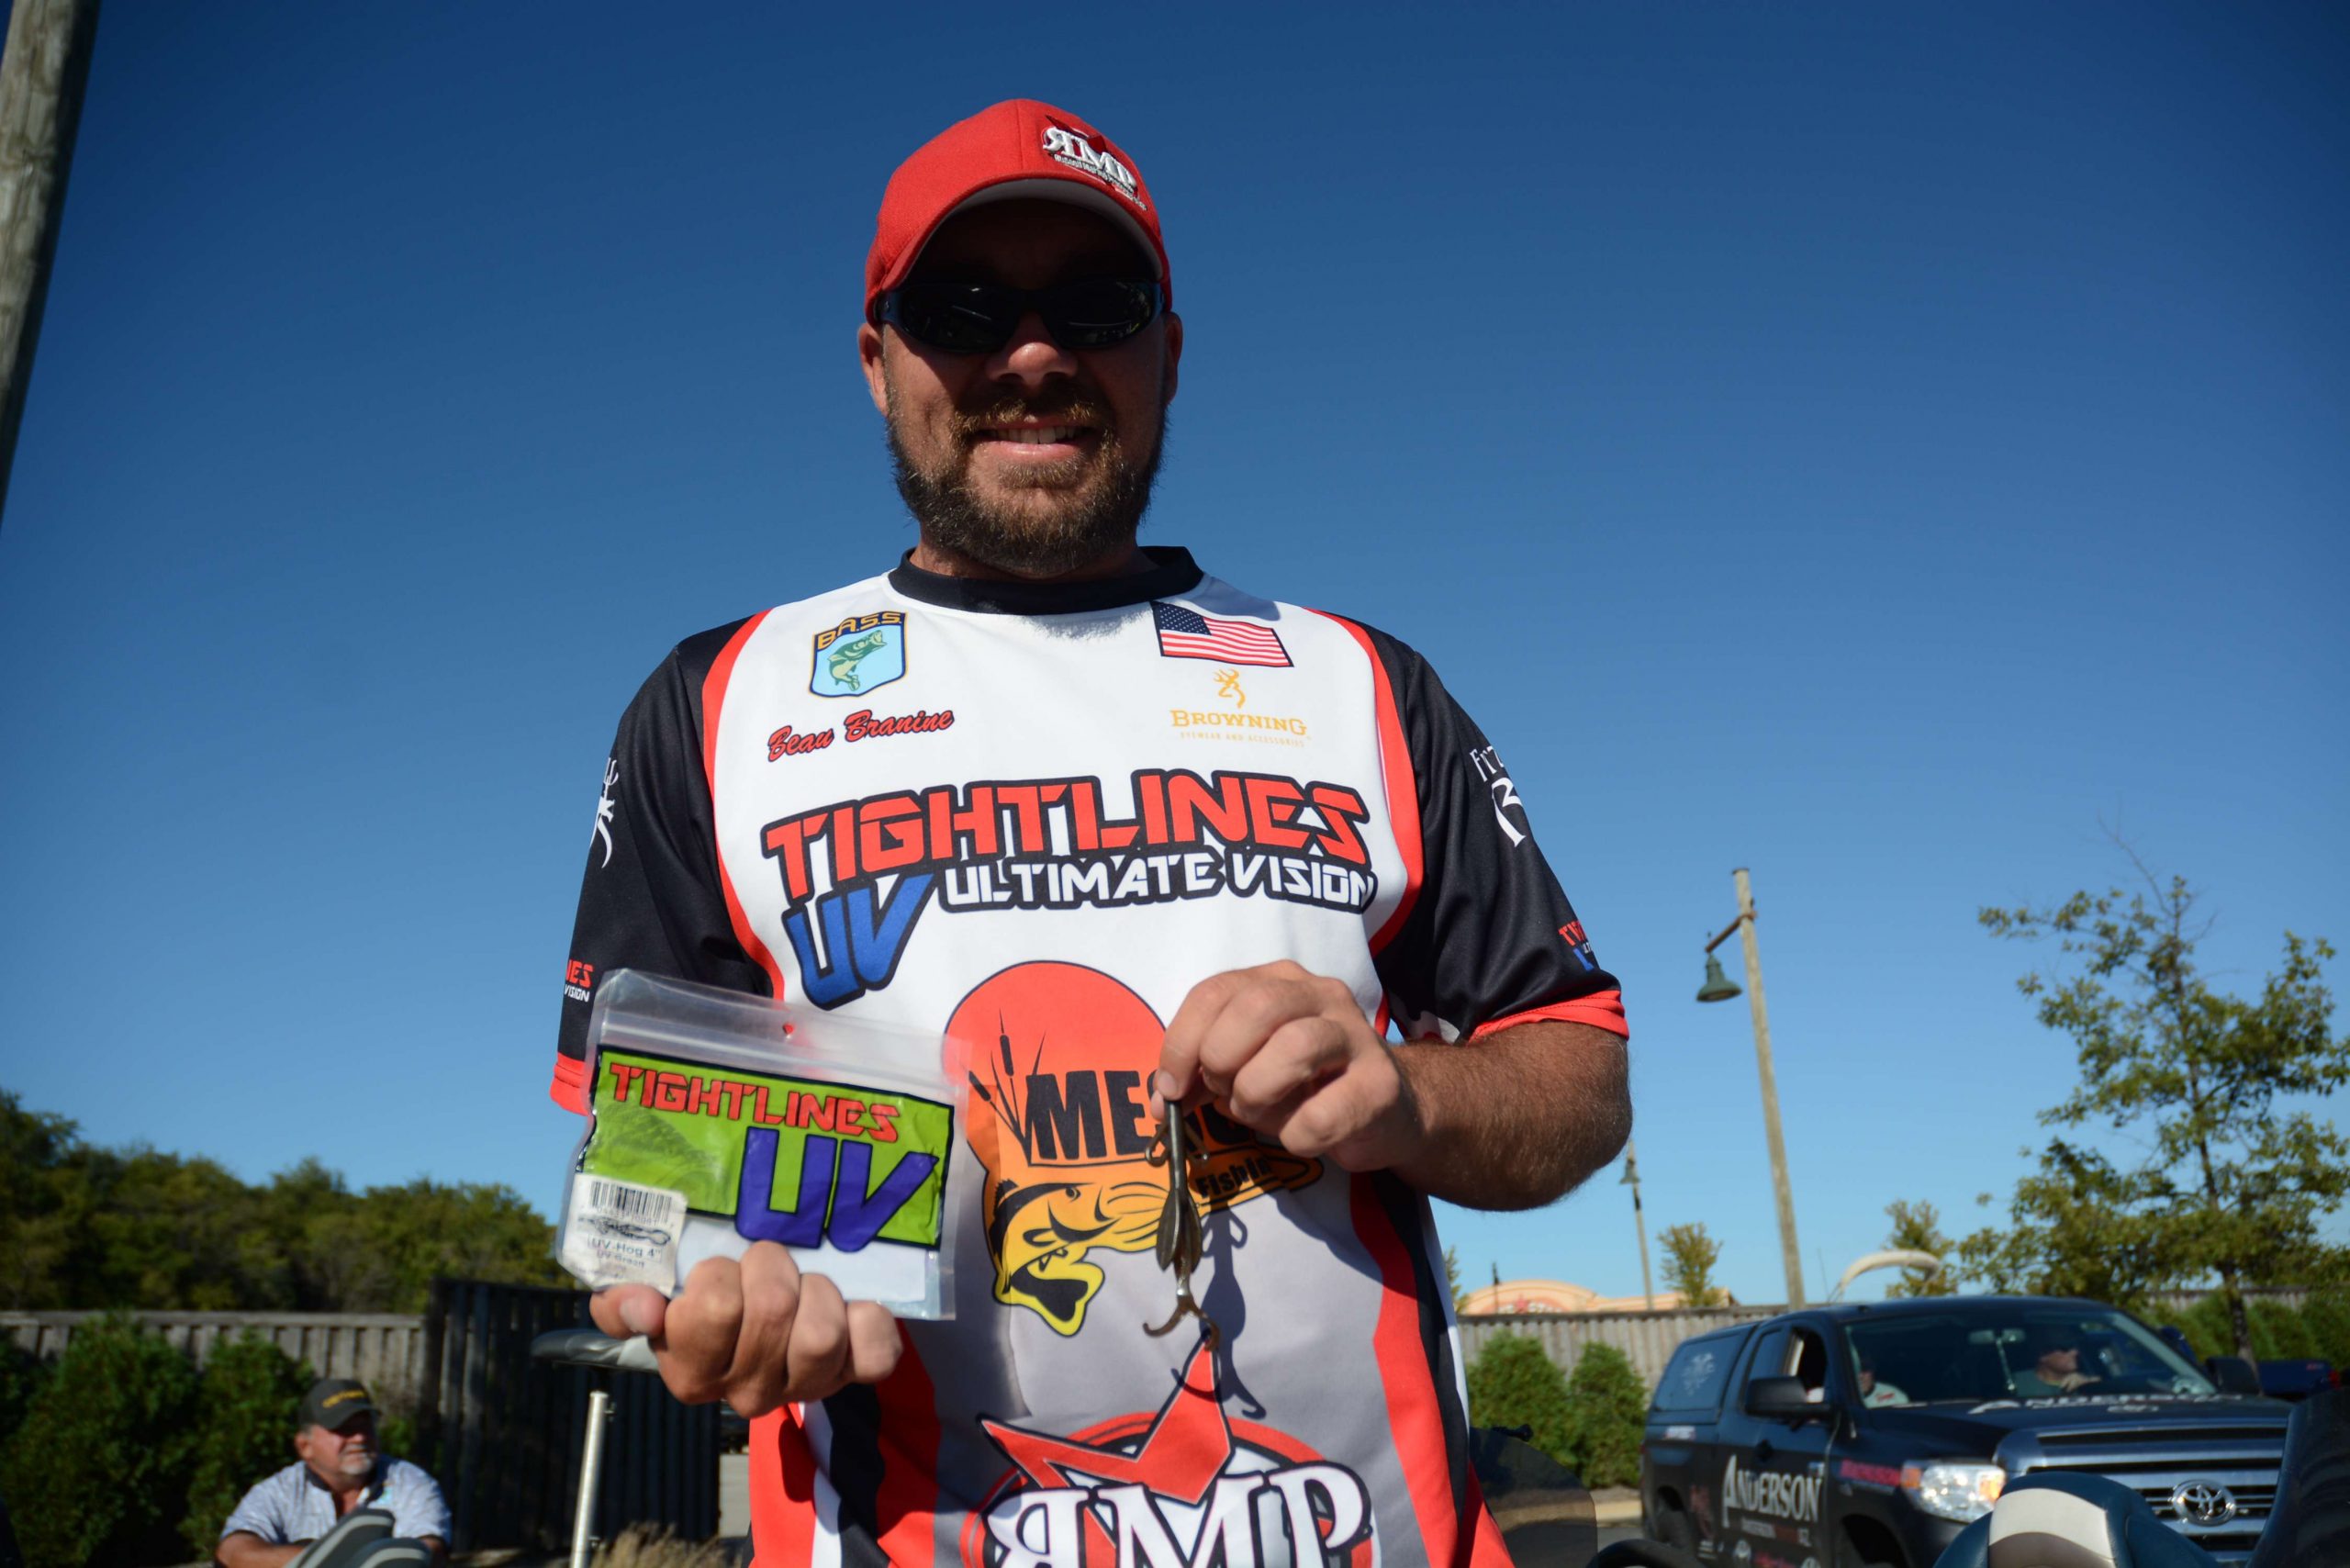 <b>Beau Branine</b><br> A Texas-rigged worm fished across shallow flats was a key lure for sixth-place finisher Beau Branine.  